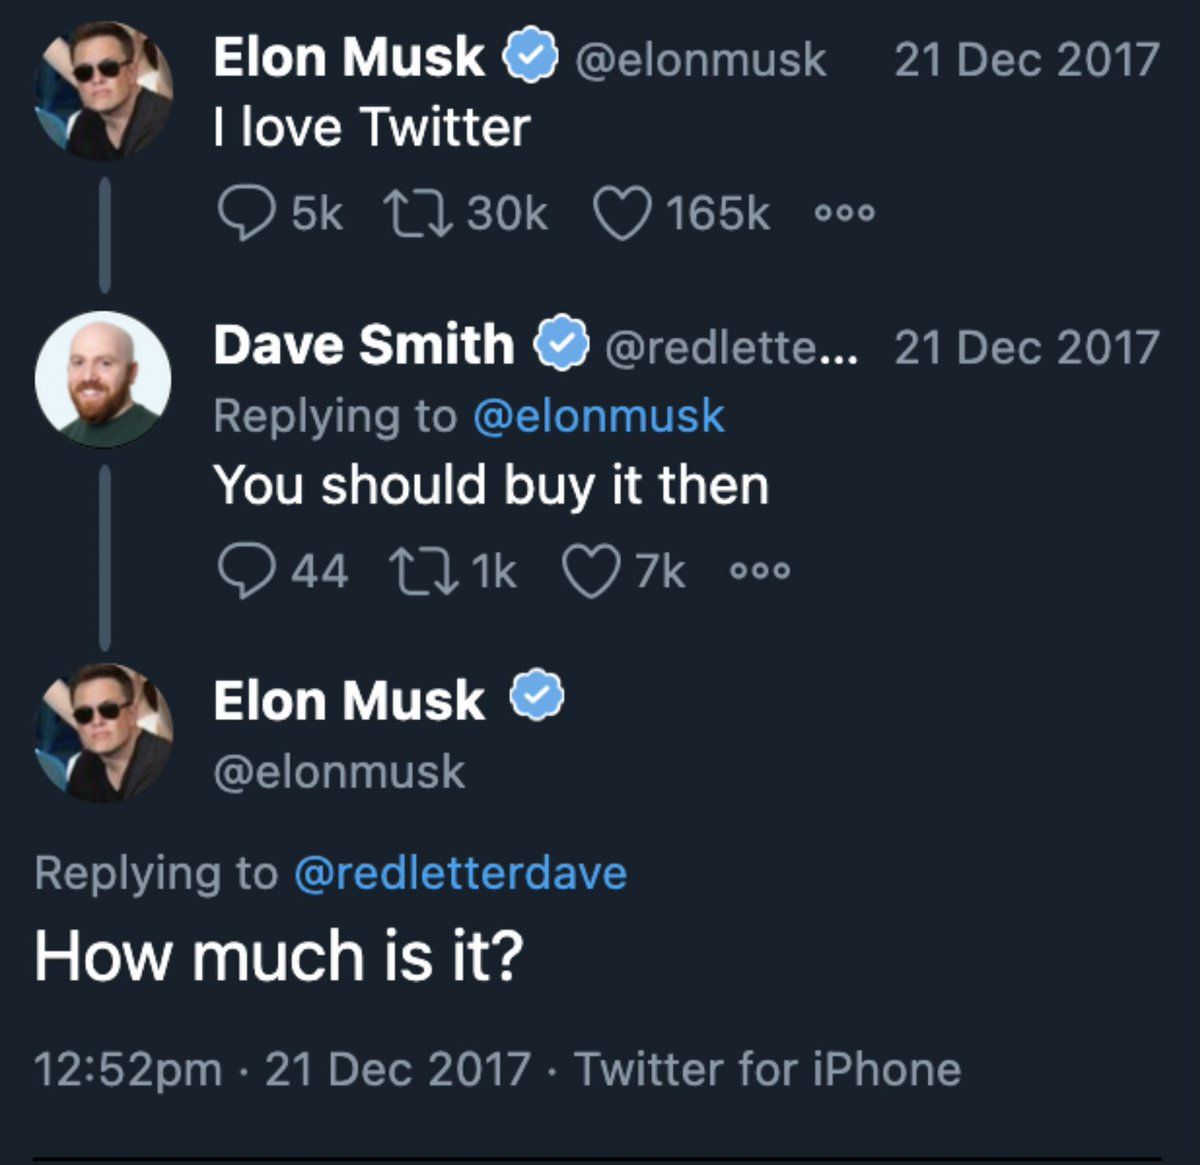 It took 4 years, 4 months and 4 days for  Elon Musk to buy Twitter at $44 billion